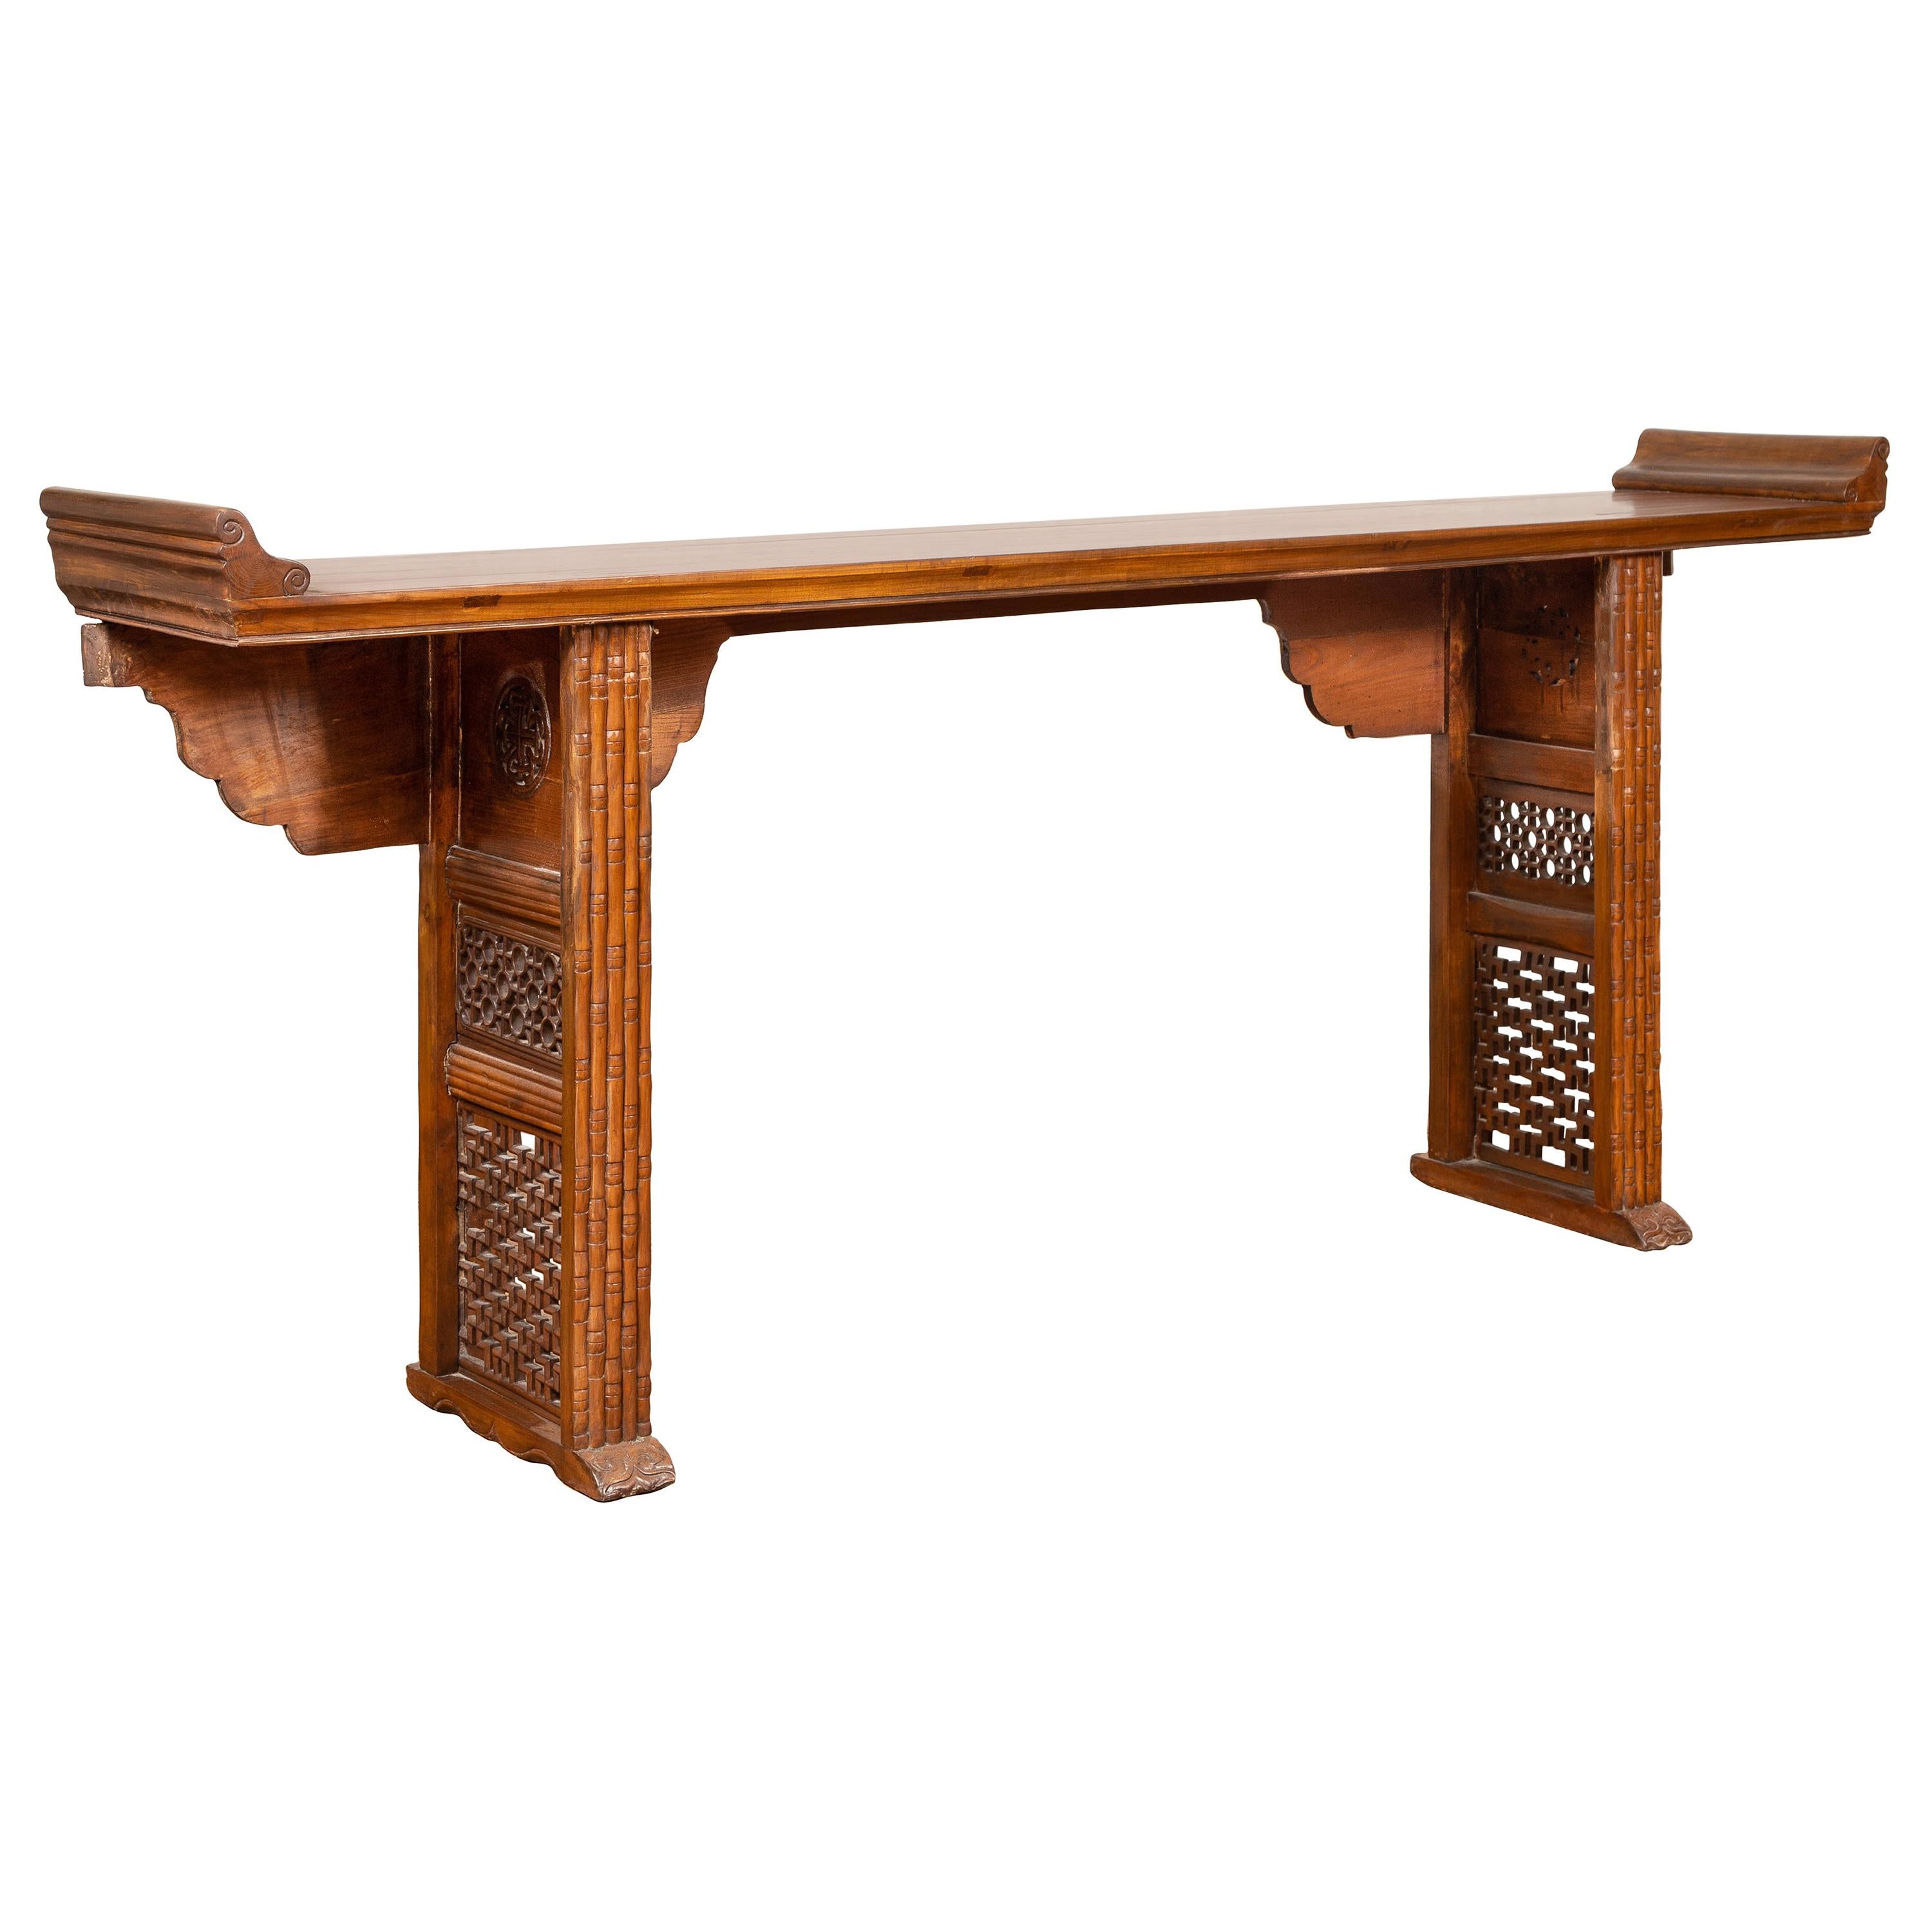 Qing Dynasty Altar Table with Bamboo Accents, Fretwork and Everted Flanges